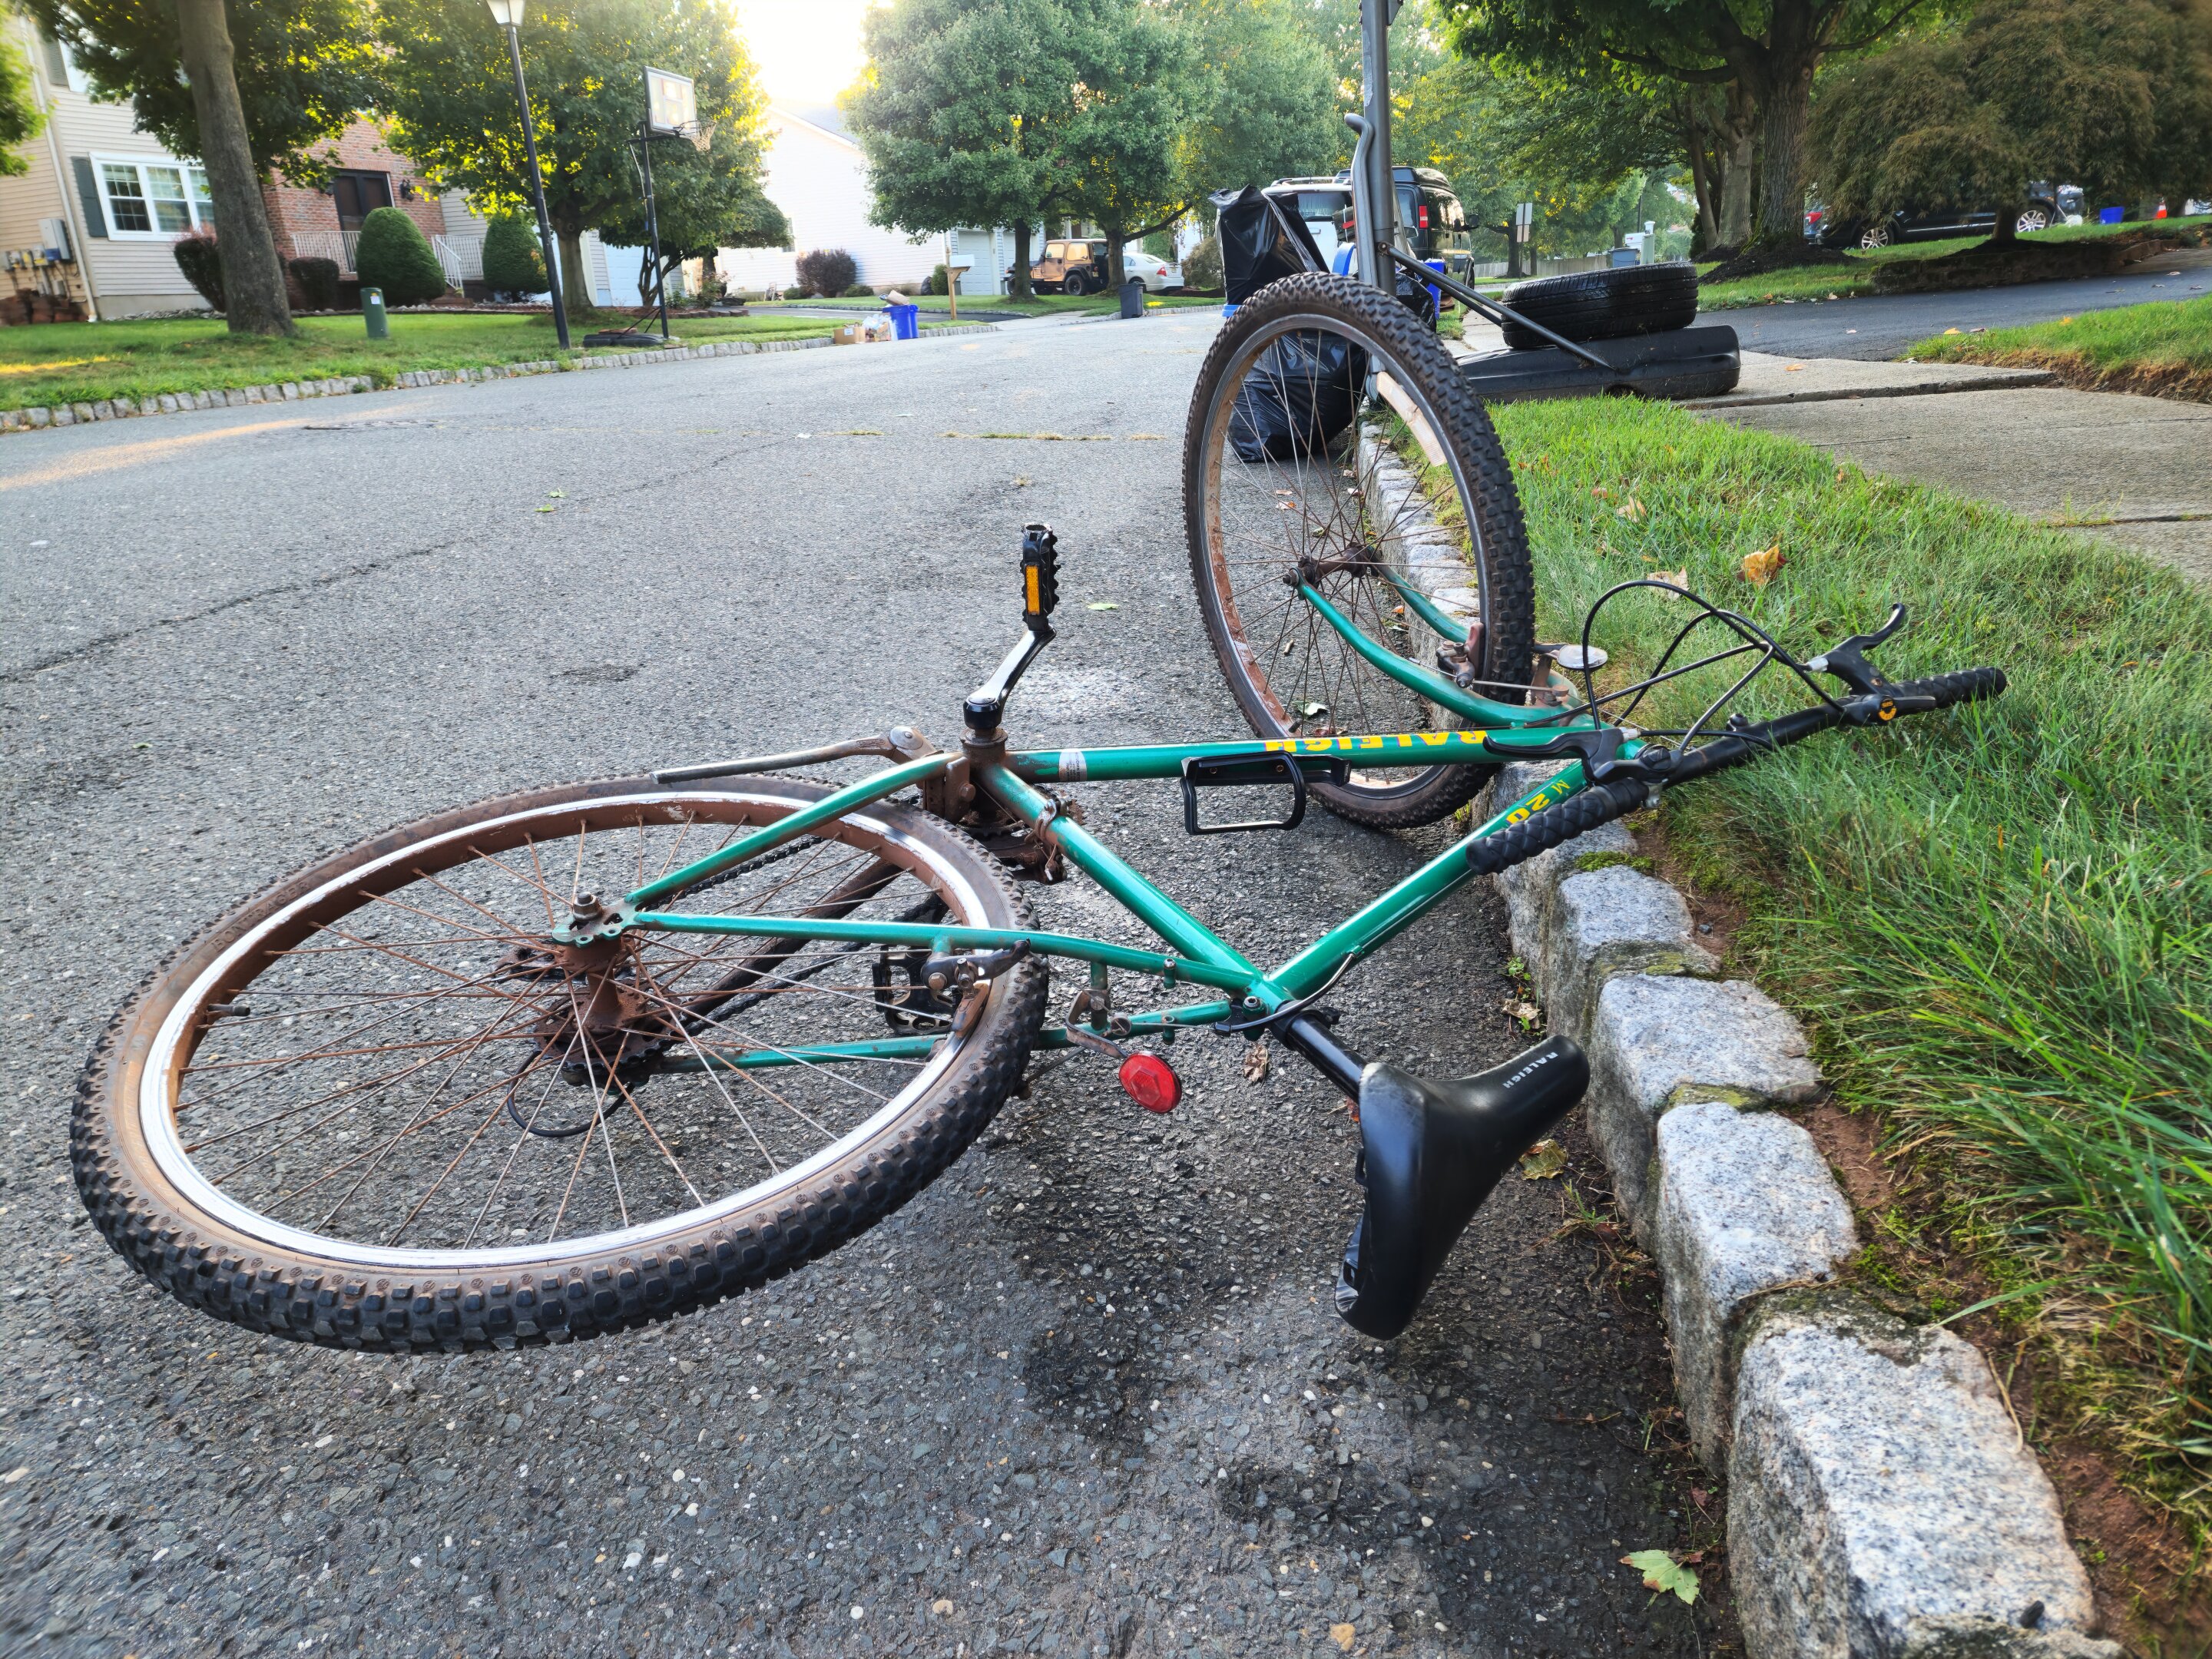 Hospitals treat thousands of drug-related bike injuries each year